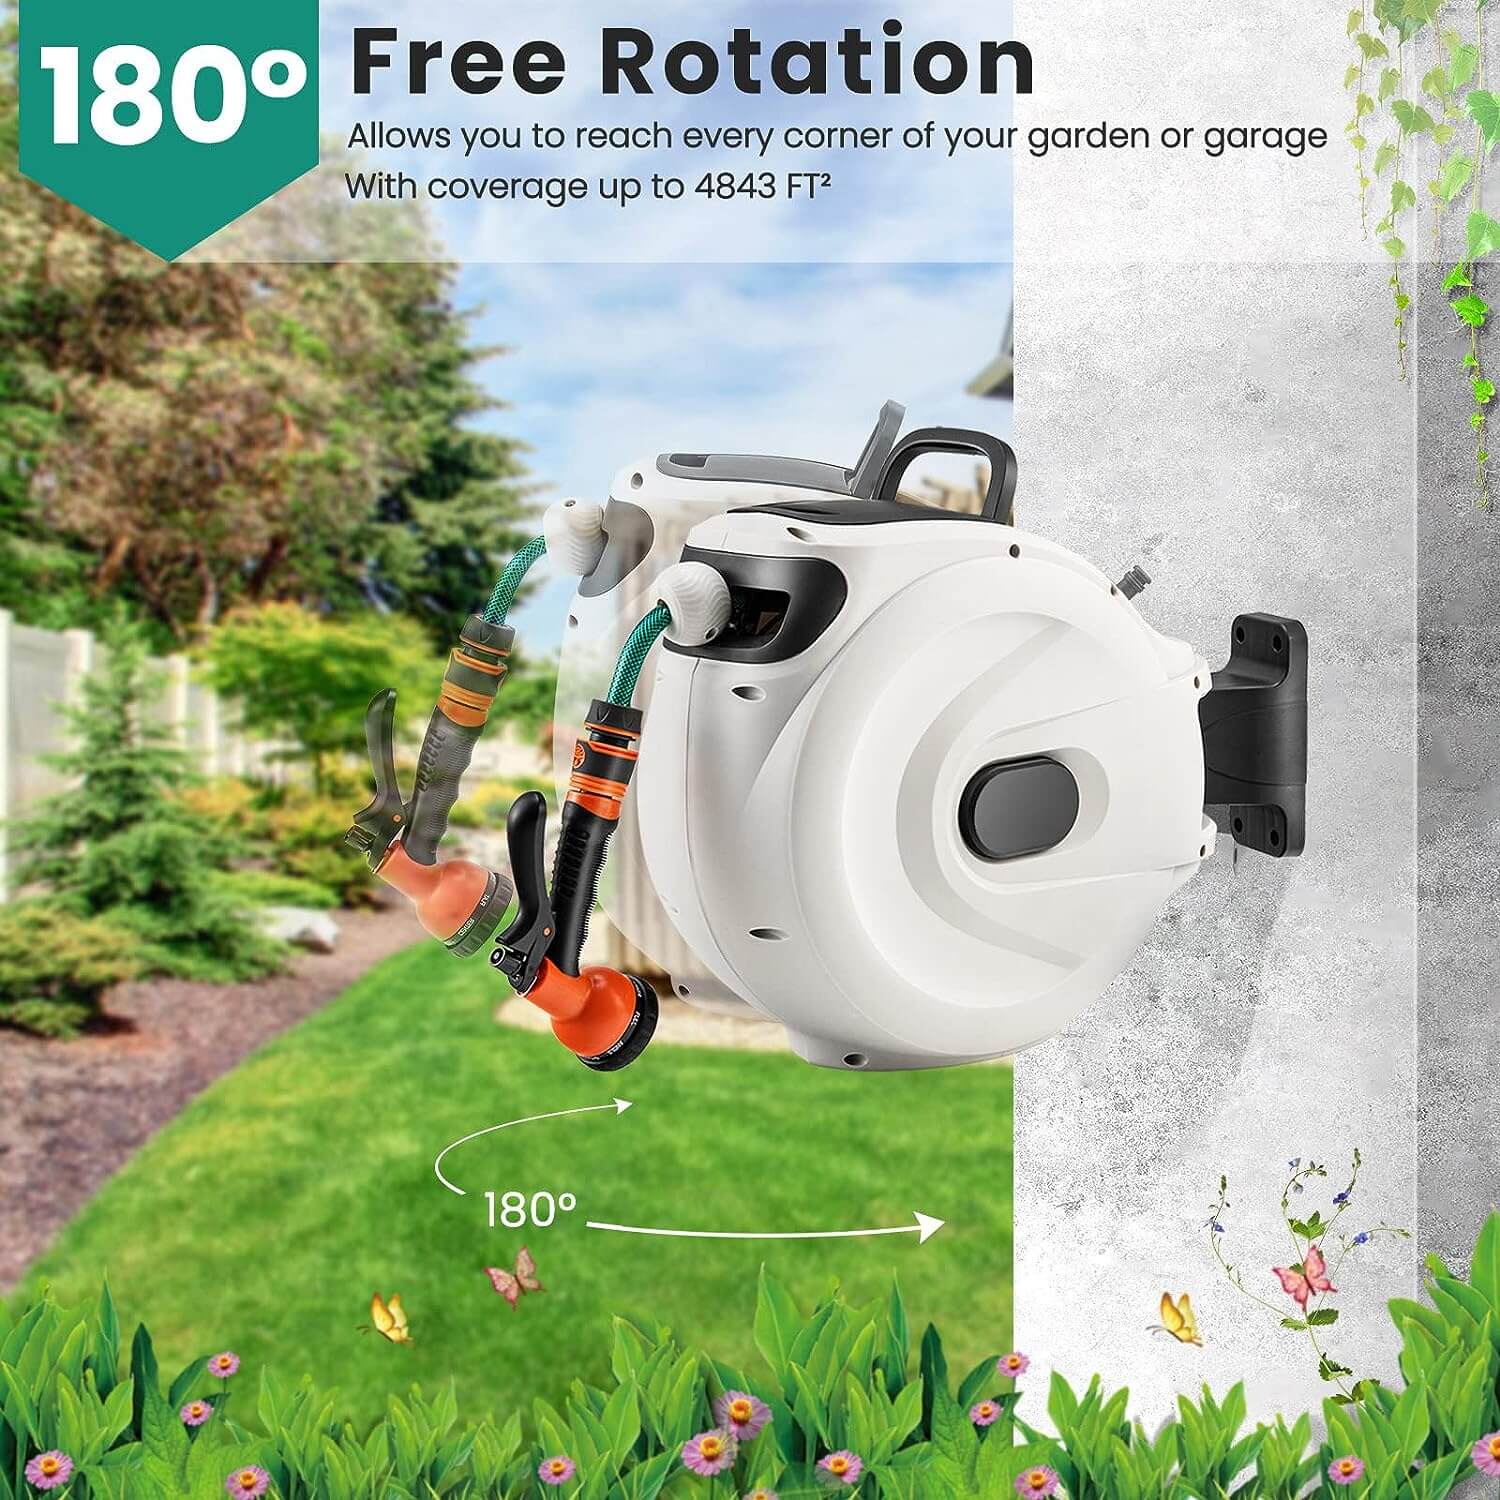 Our retractable hose reel can be installed to the wall with the included 180° swivel mounting bracket. The 104.5FT (98FT+ 6.5FT ) water hose with 180° swivel bracket offers large coverage area and allows you to reach every corner of your garden.